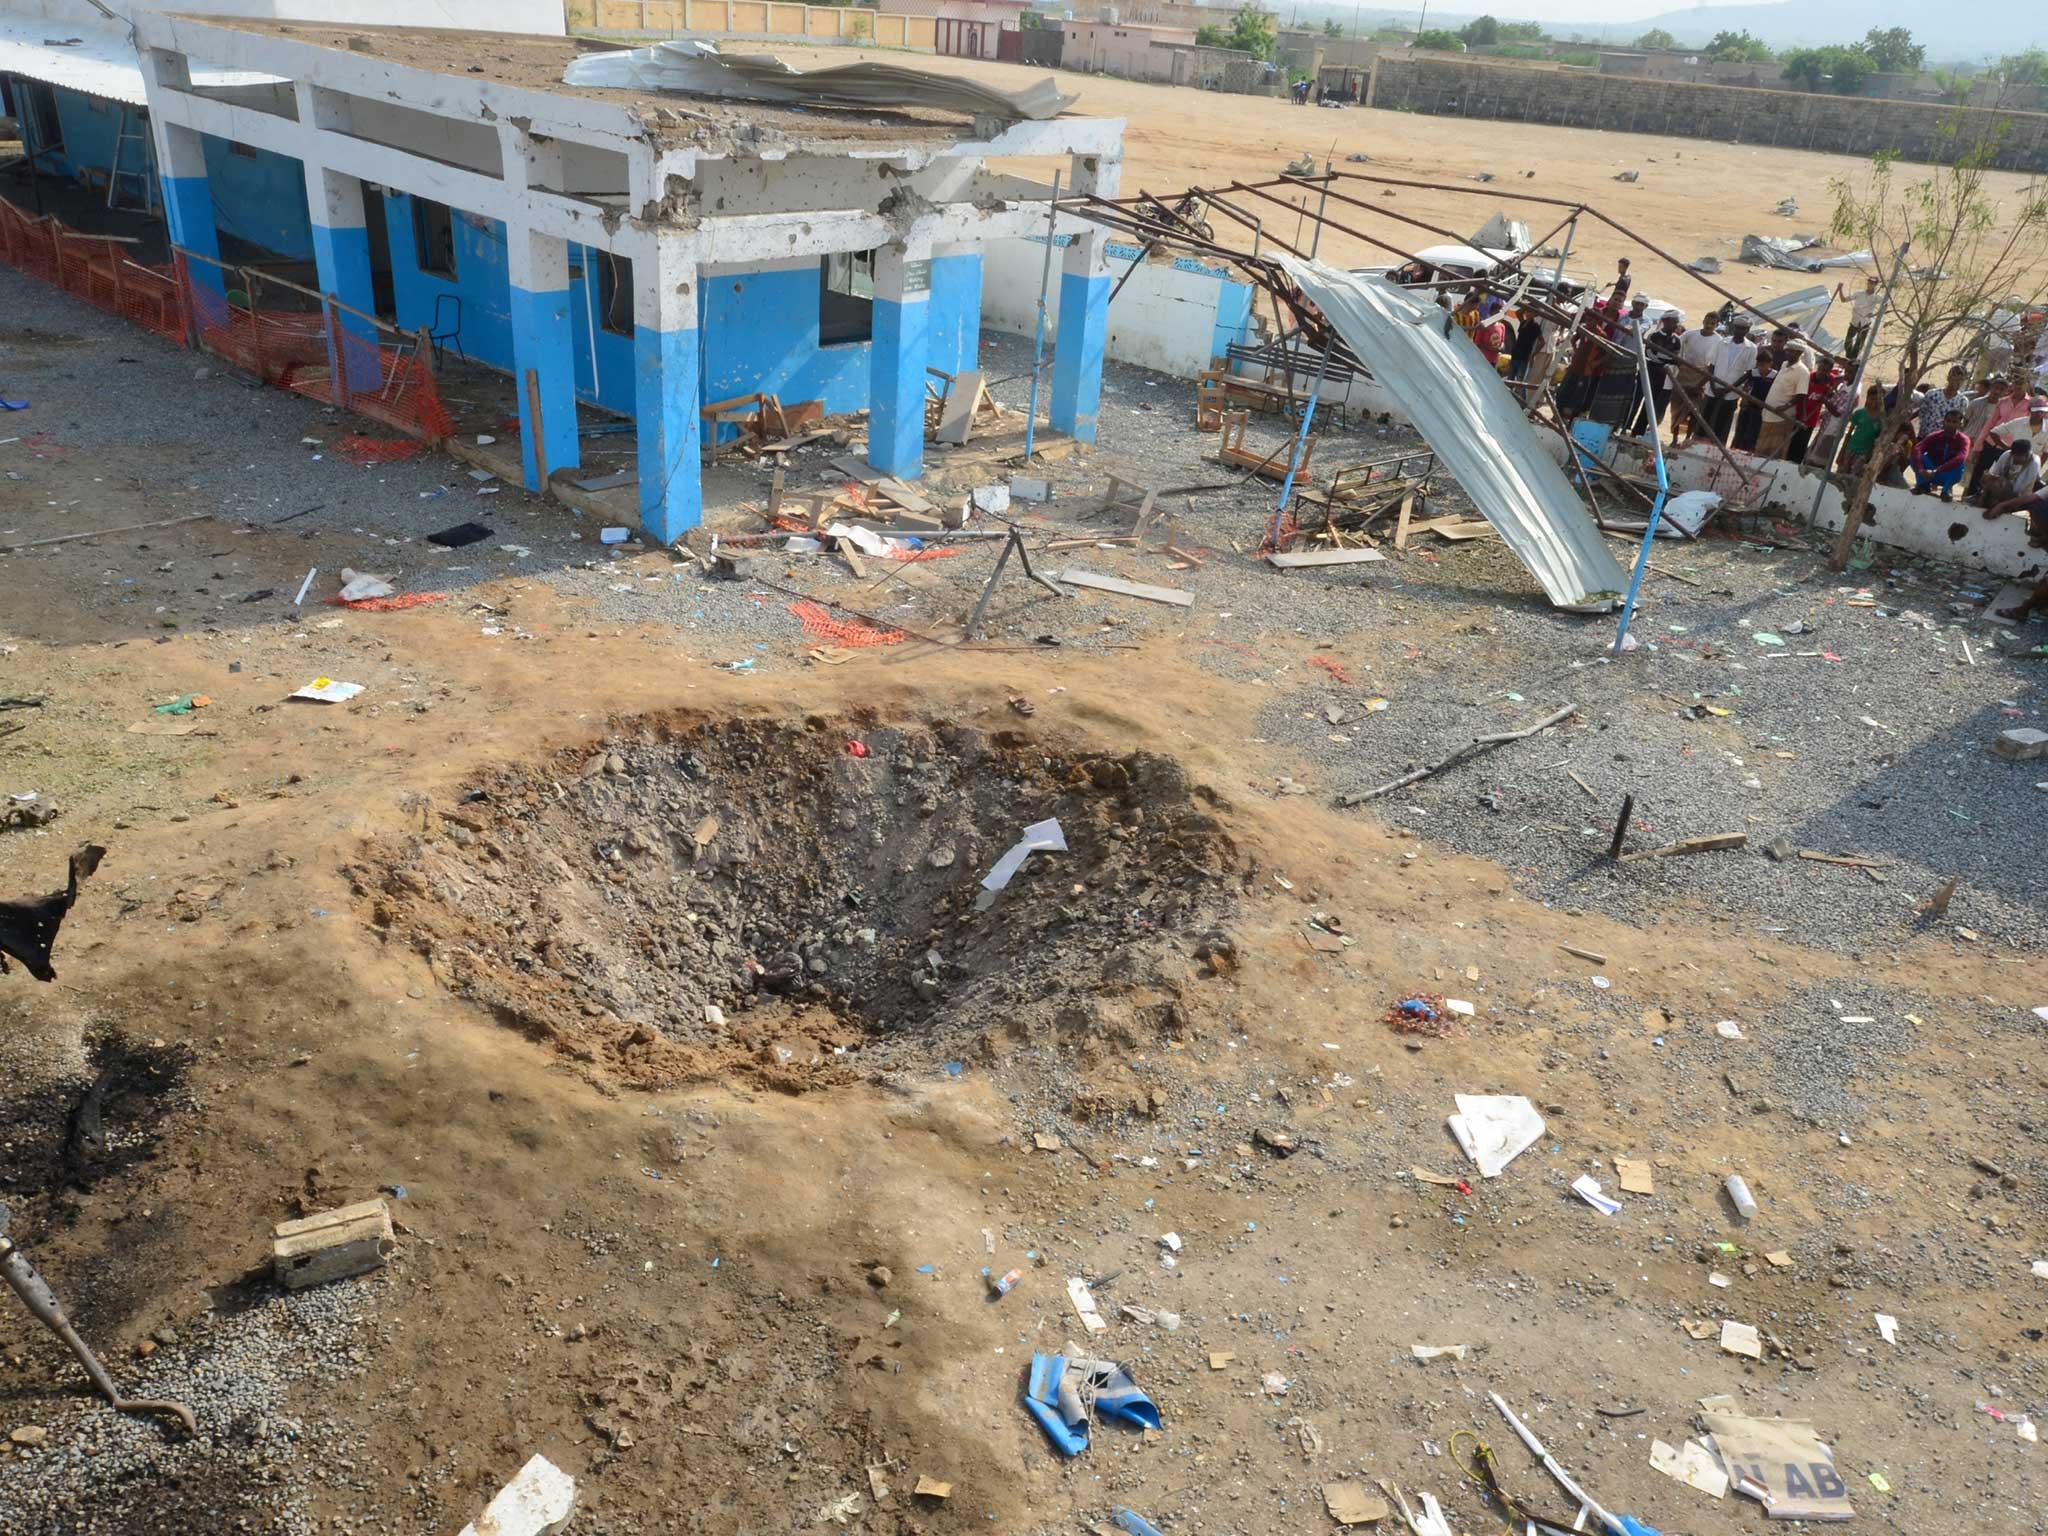 A crater caused by a Saudi-led air strike in August that hit a hospital yard in Hajjah province